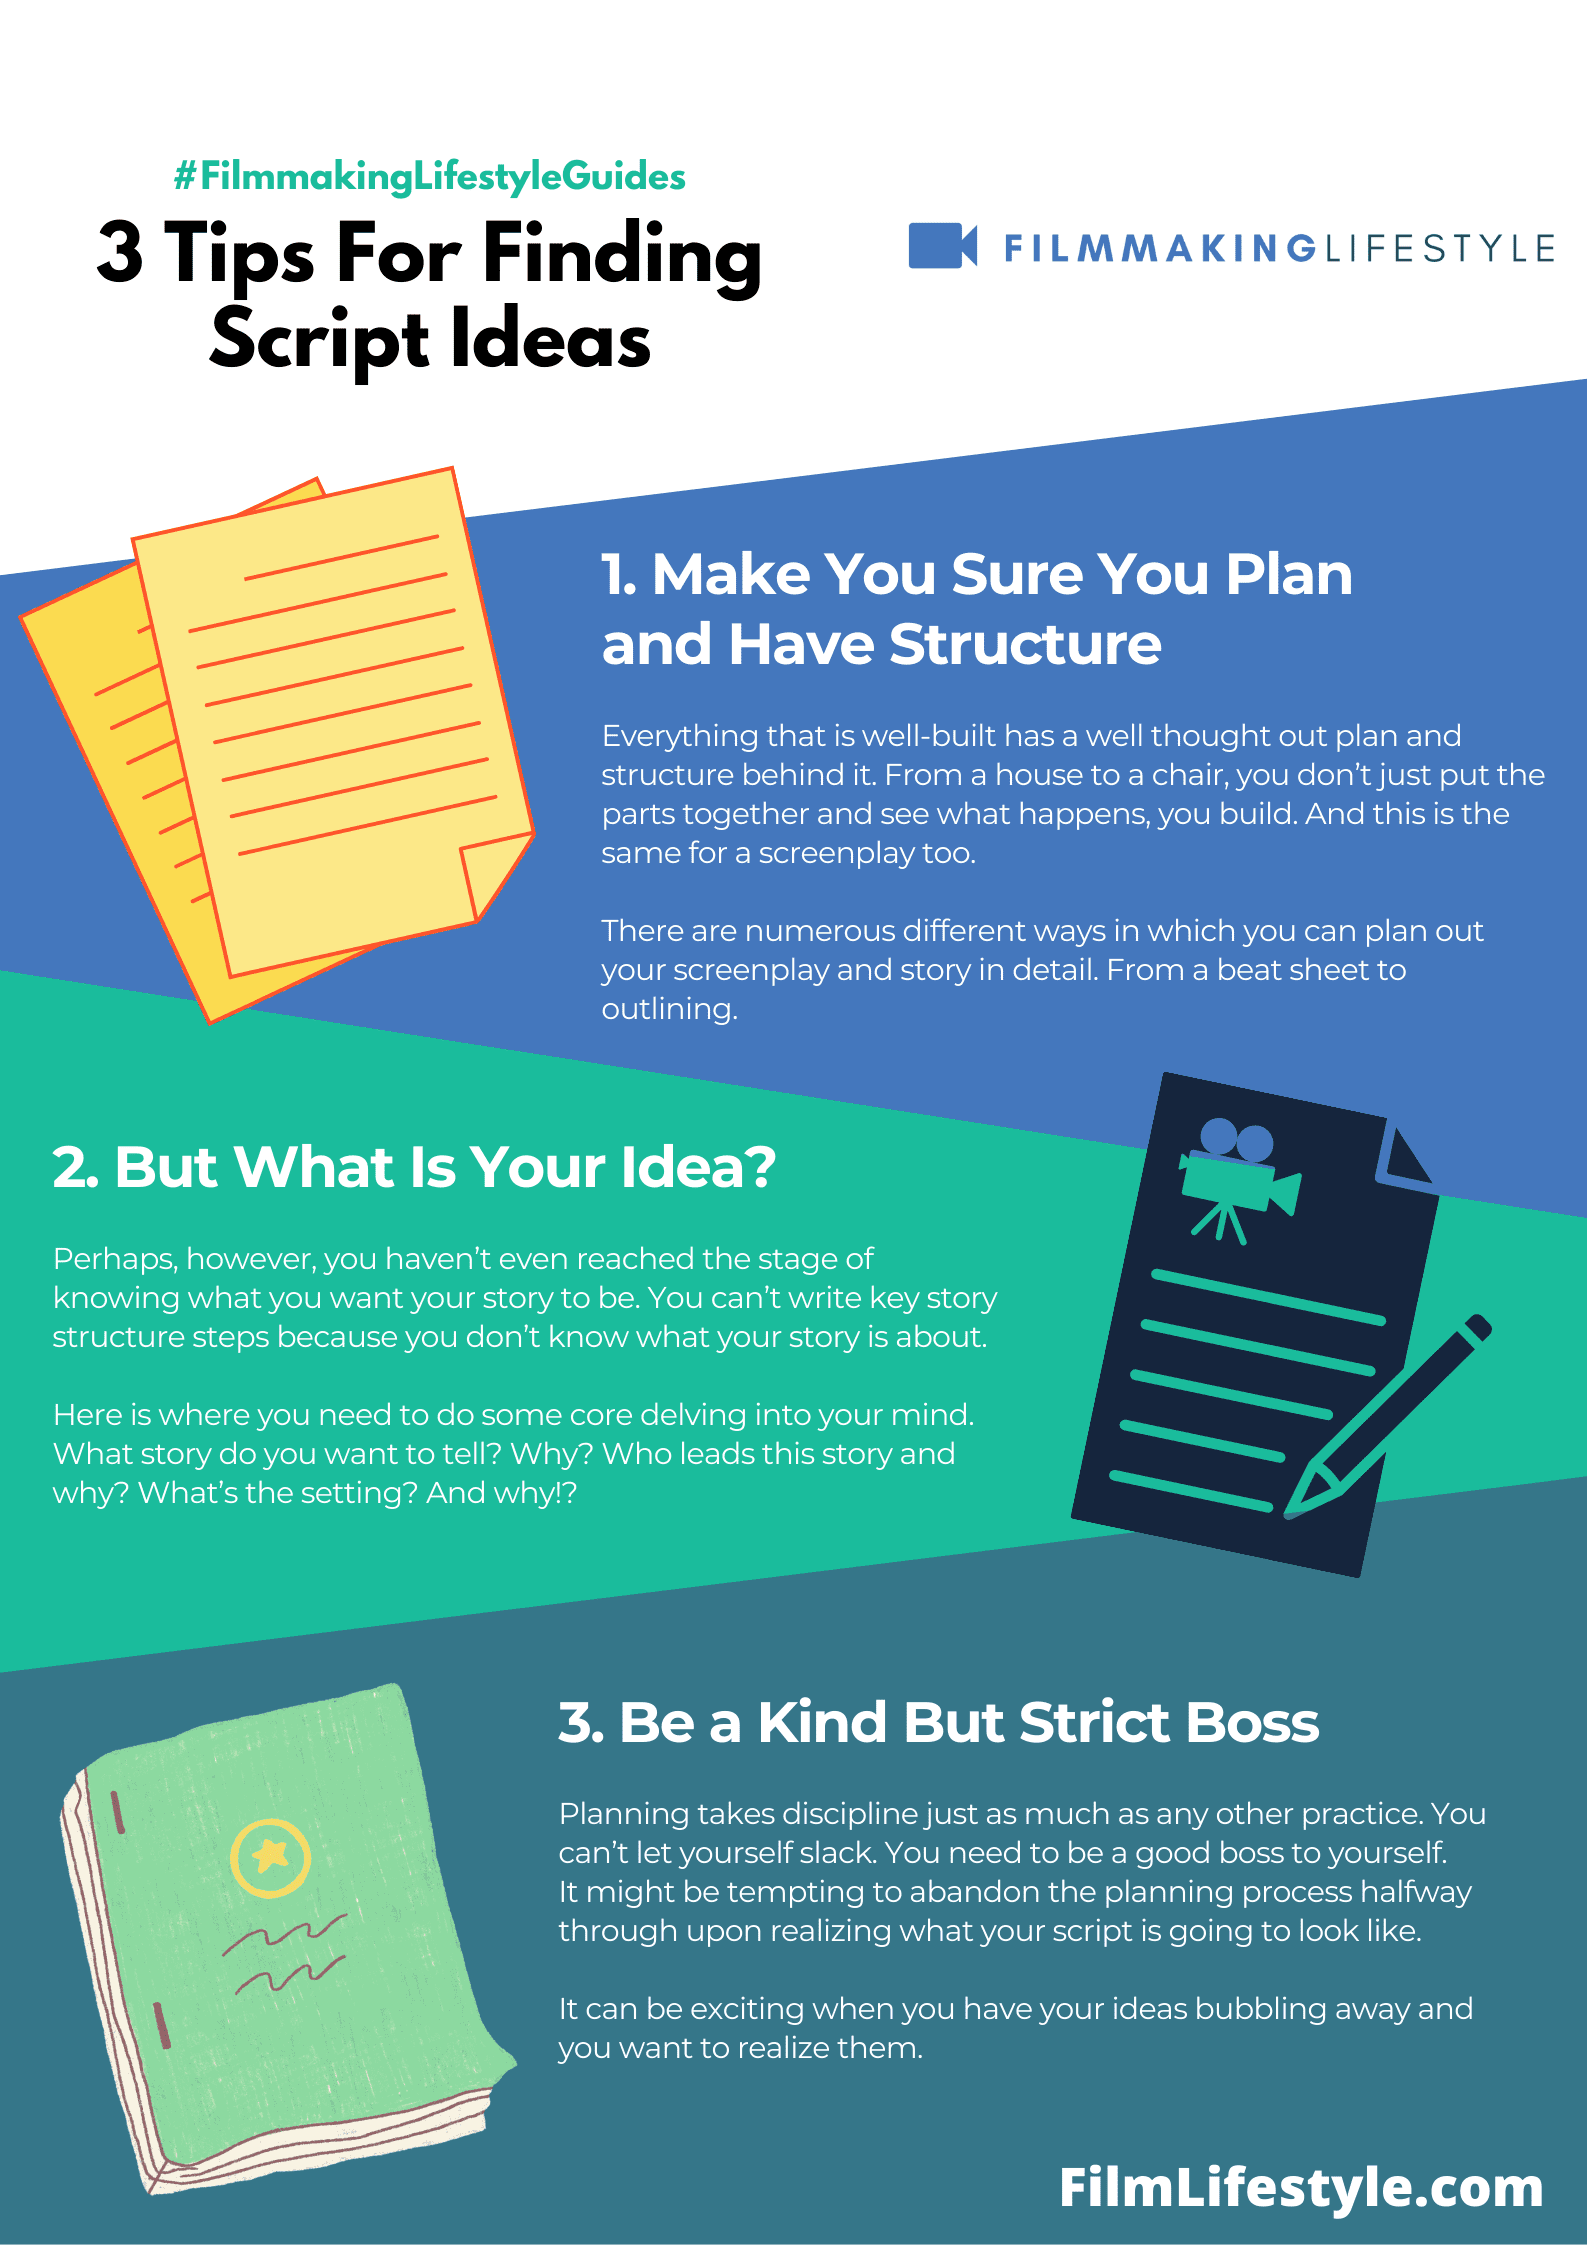 How to Make Your Script Ideas Practical